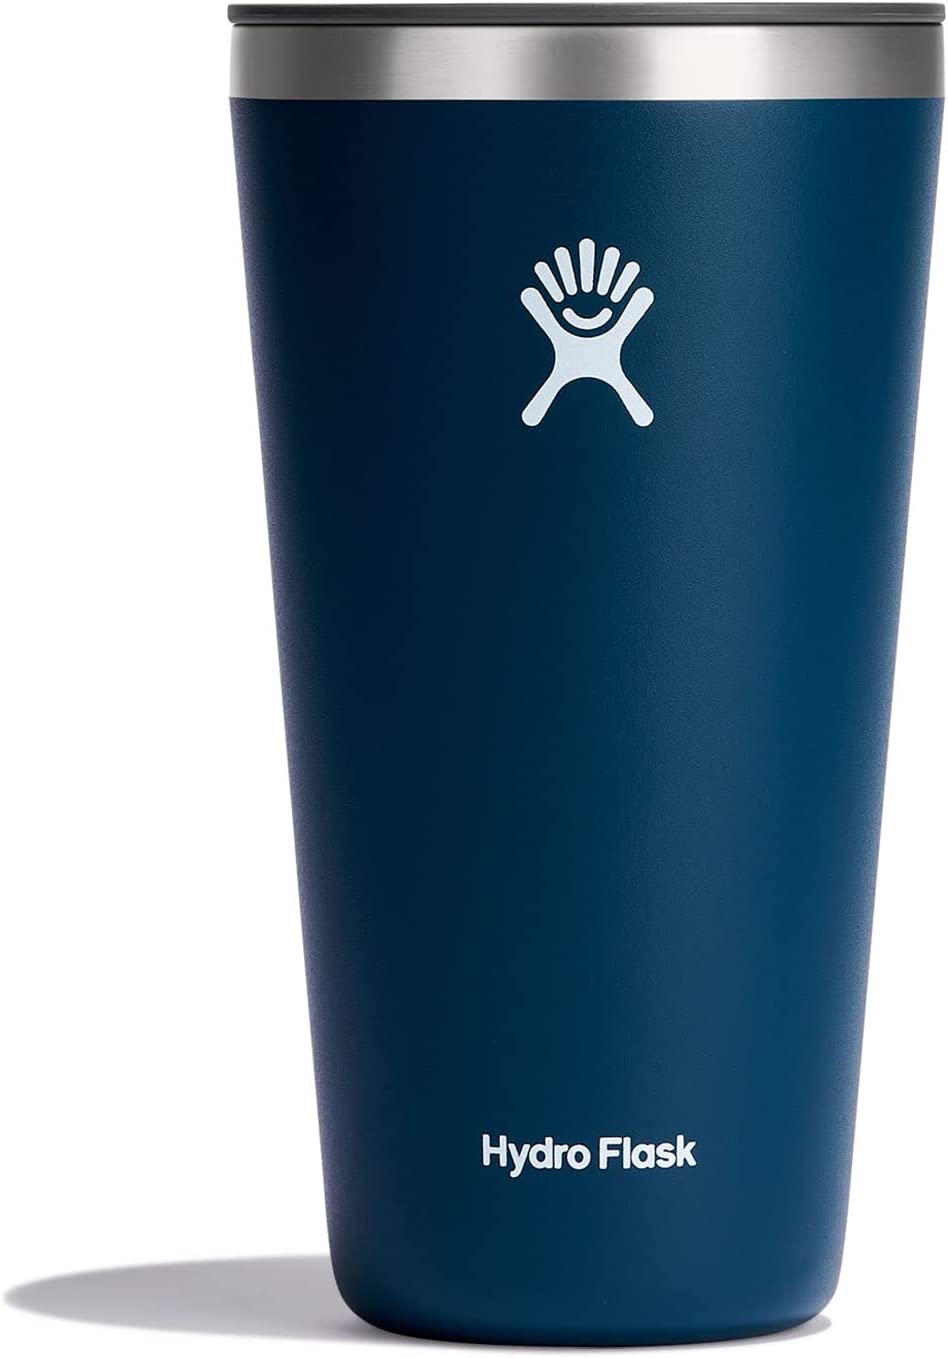 https://discounttoday.net/wp-content/uploads/2022/12/Hydro-Flask-28oz-All-Around-Tumbler-Stainless-Steel-Reusable-Insulated-Travel-Drinking-Cup-Water-Bottle-with-Lid-Indigo.jpg